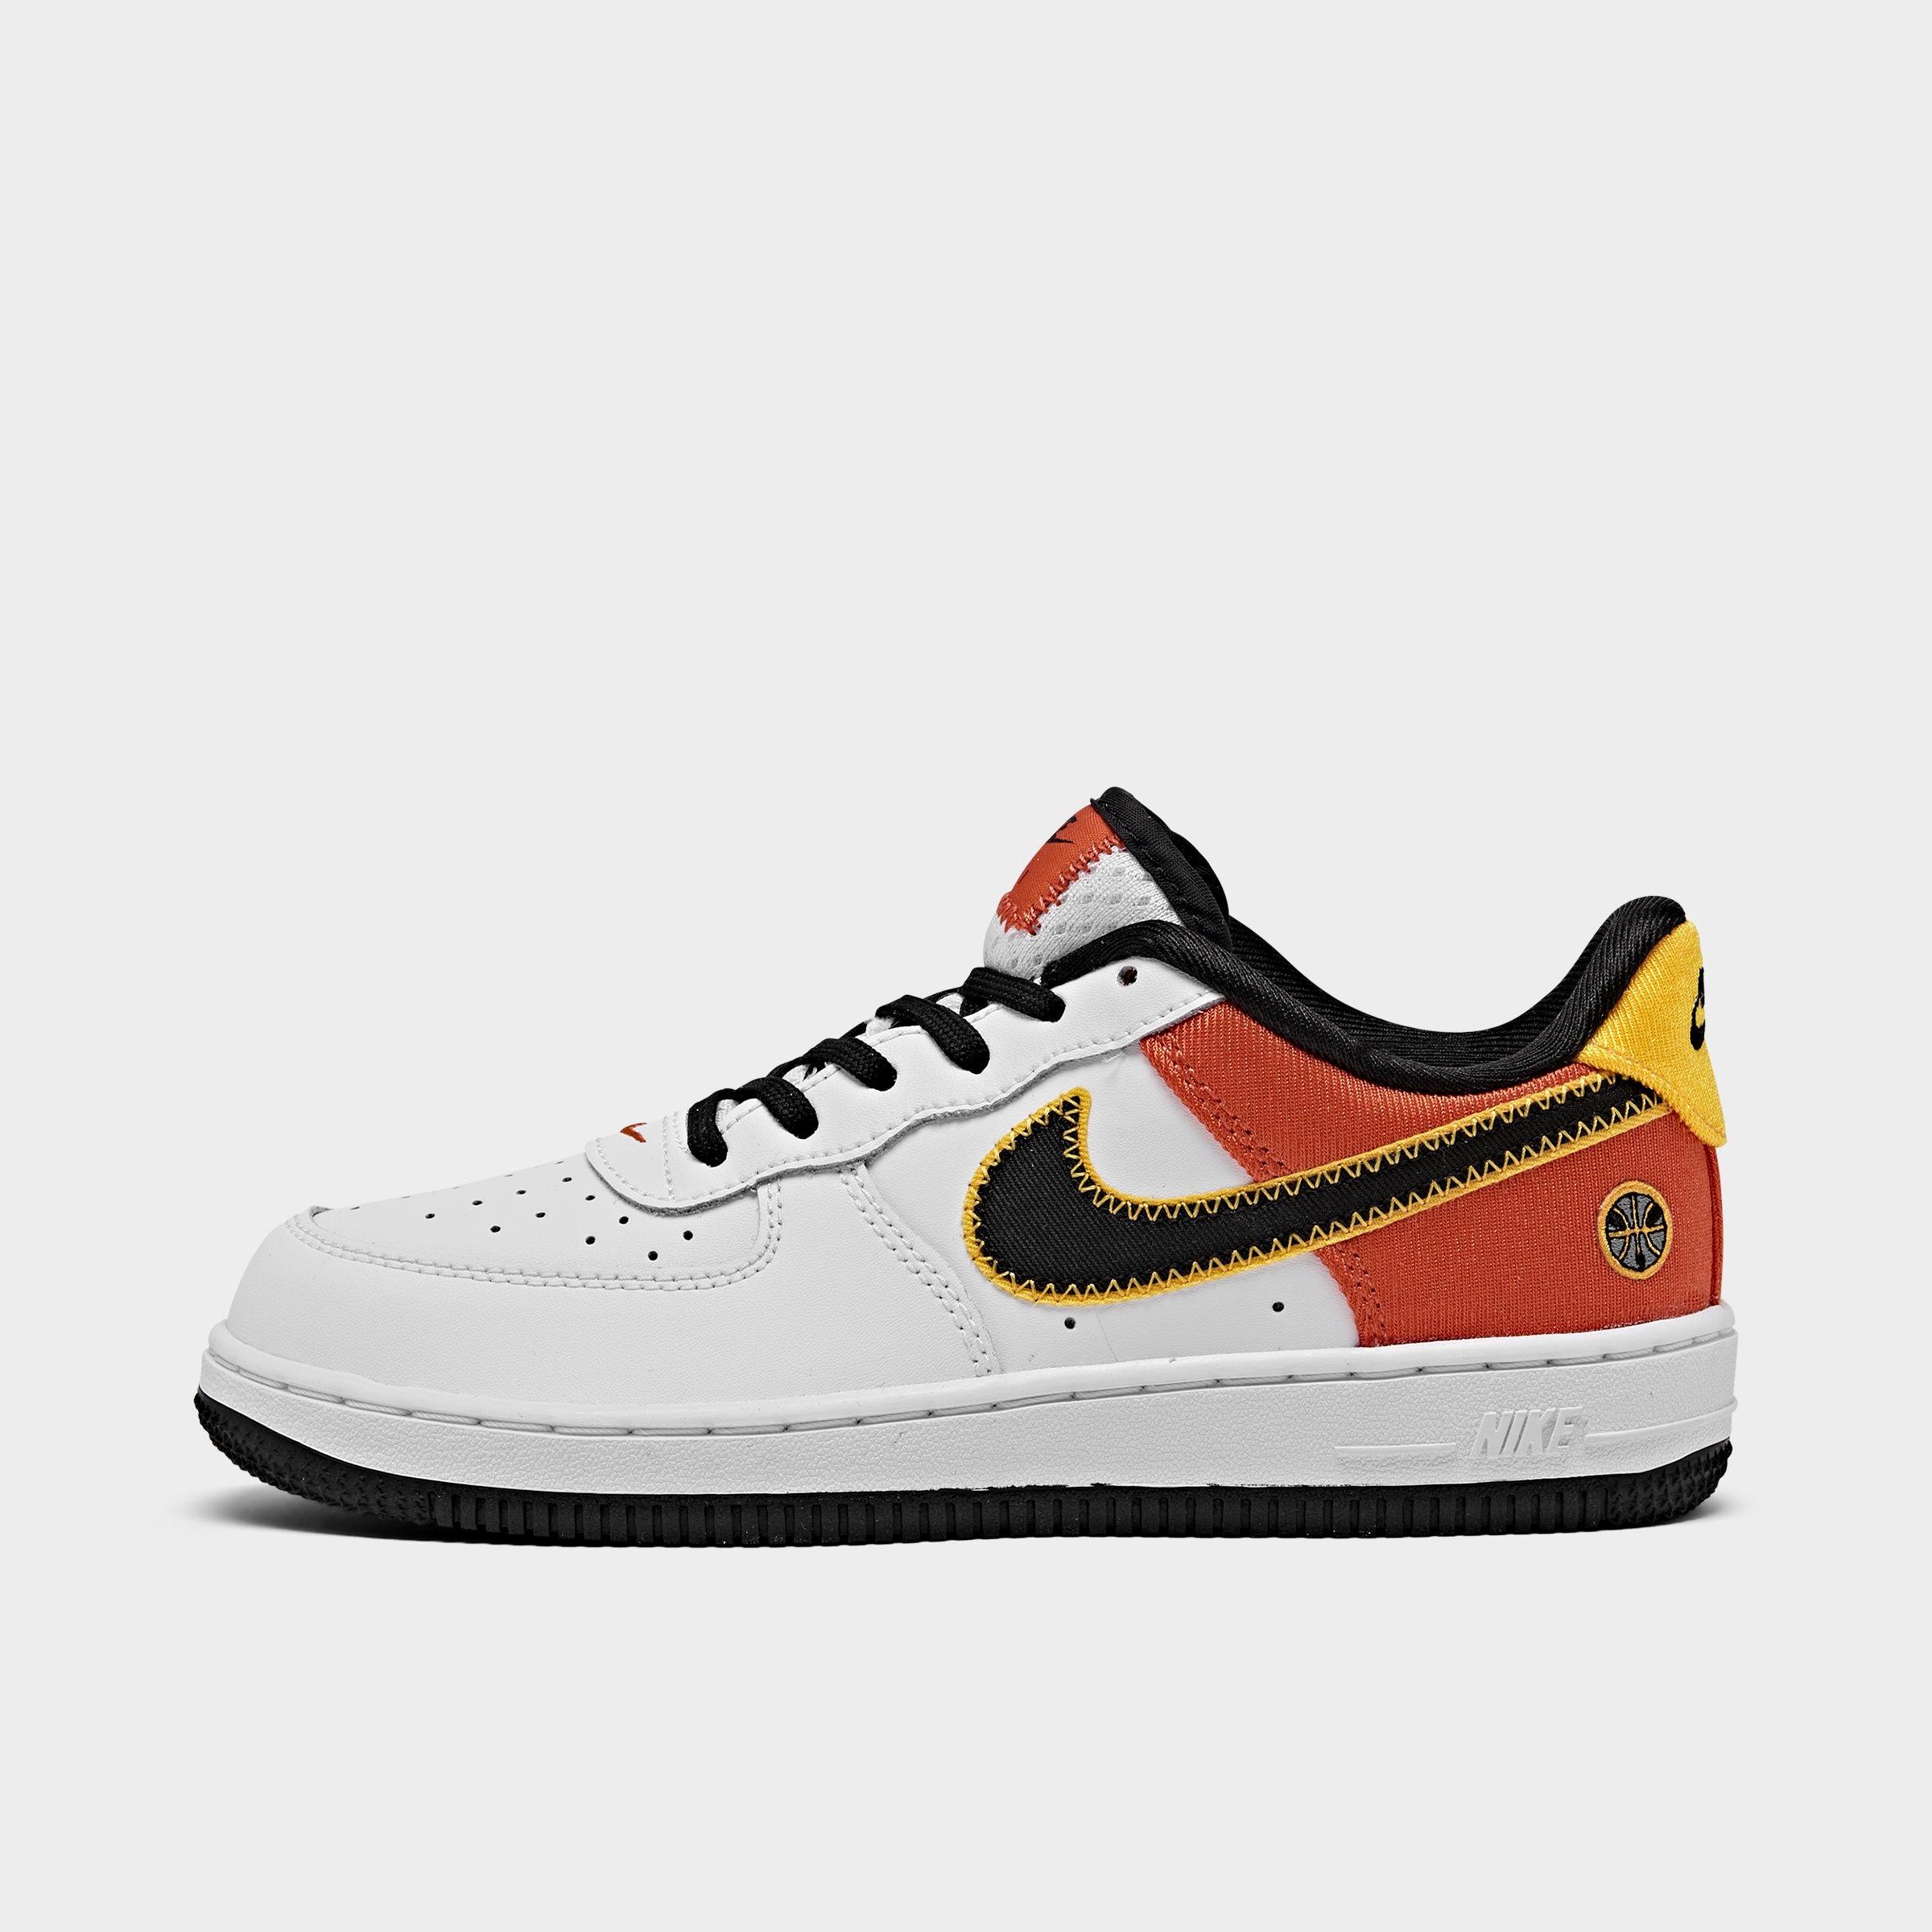 finish line air force ones